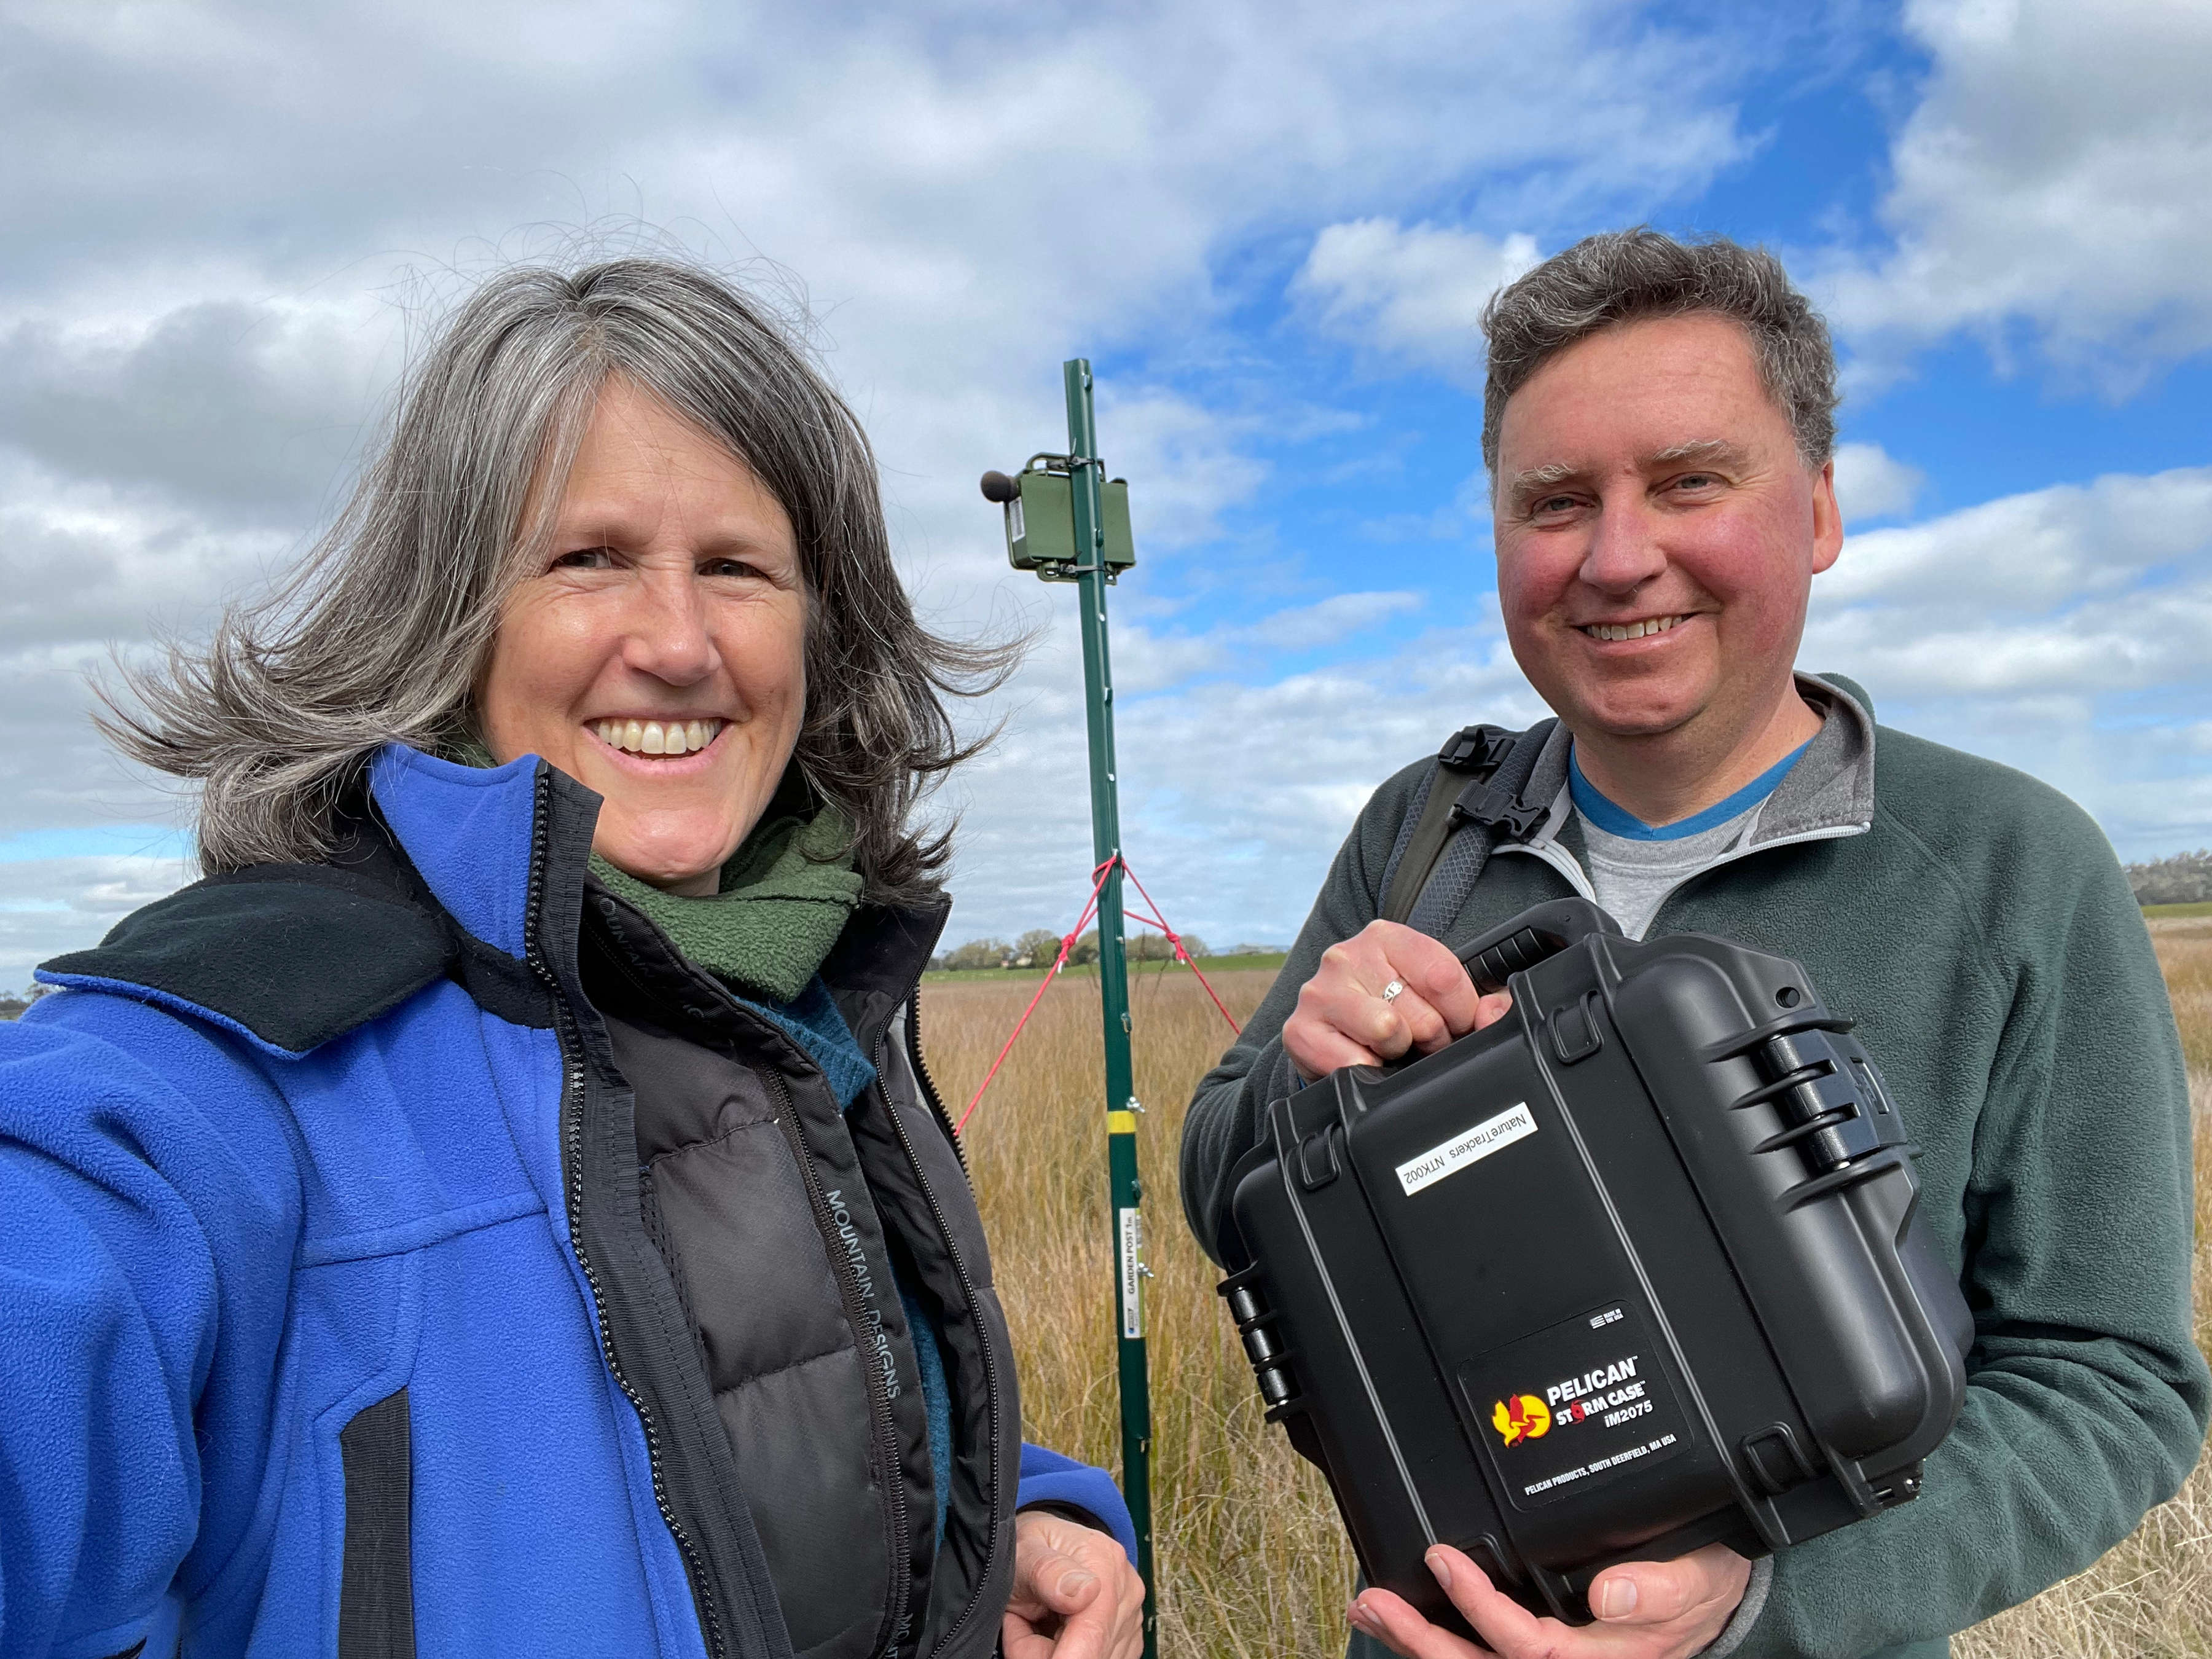 Clare Hawkins and Jim Lovell standing in a field of grass on a cloudy day. They are looking directly at the camera and smiling. Jim is holding a small black equipment case. The person on the right has their arm extended, taking the selfie. In the background between them is a pole with a small green box attached at the top. They are tracking wedge tailed eagles.